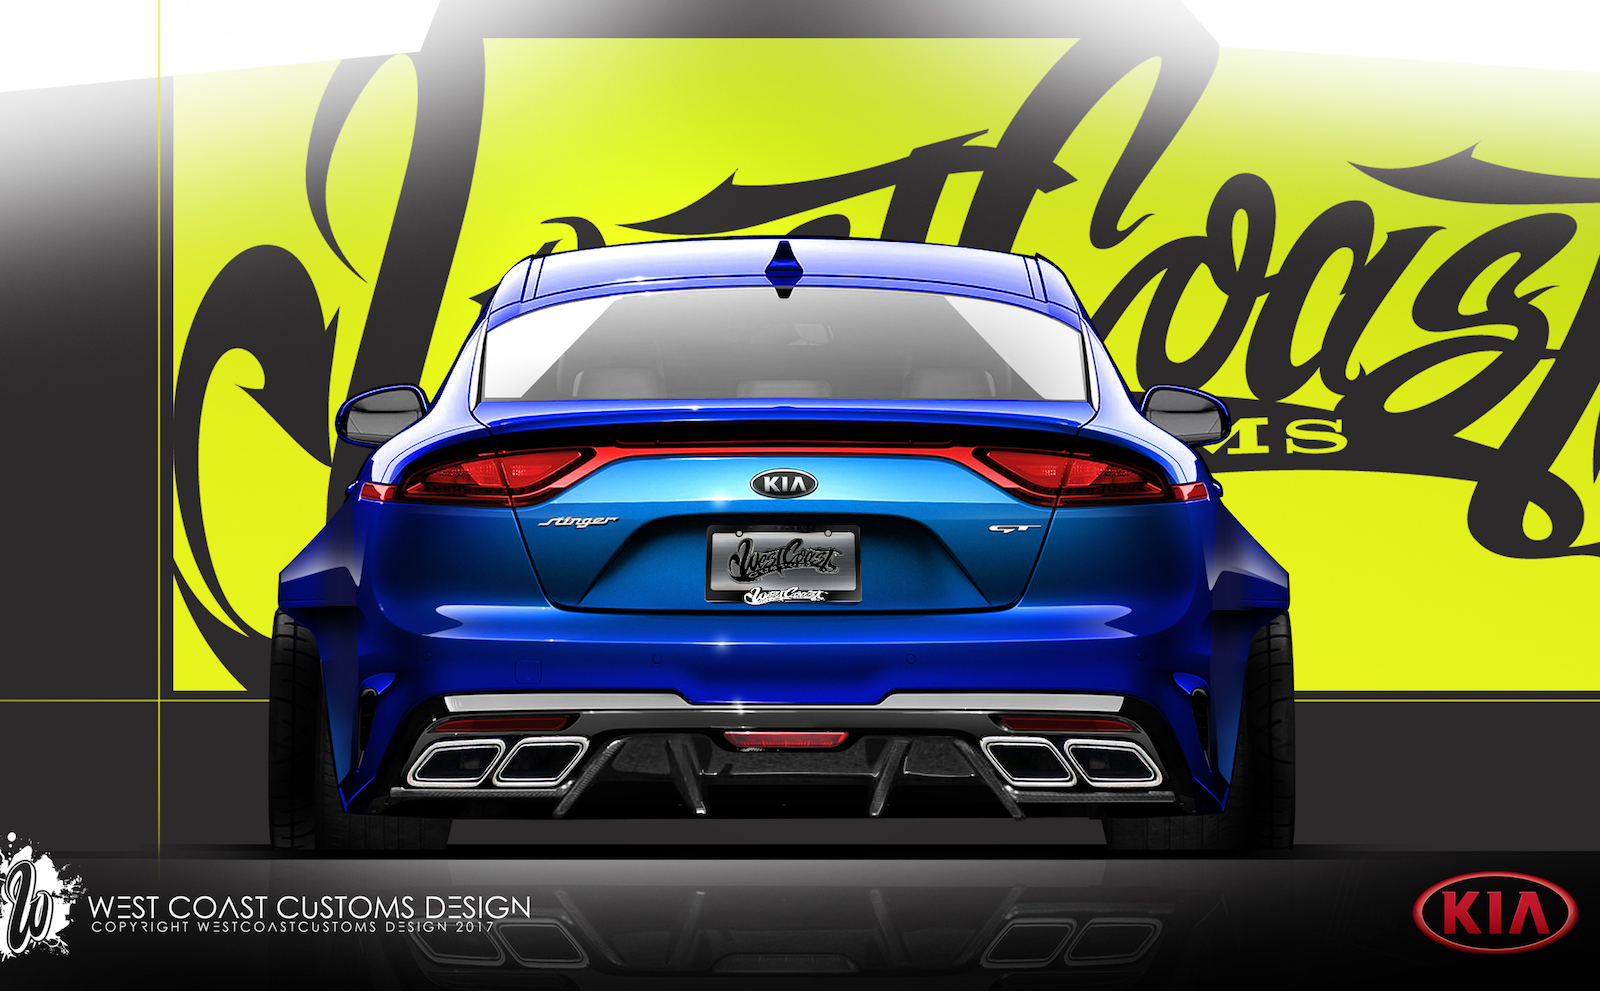 SEMA-bound Kia Stinger project shows off tuning potential